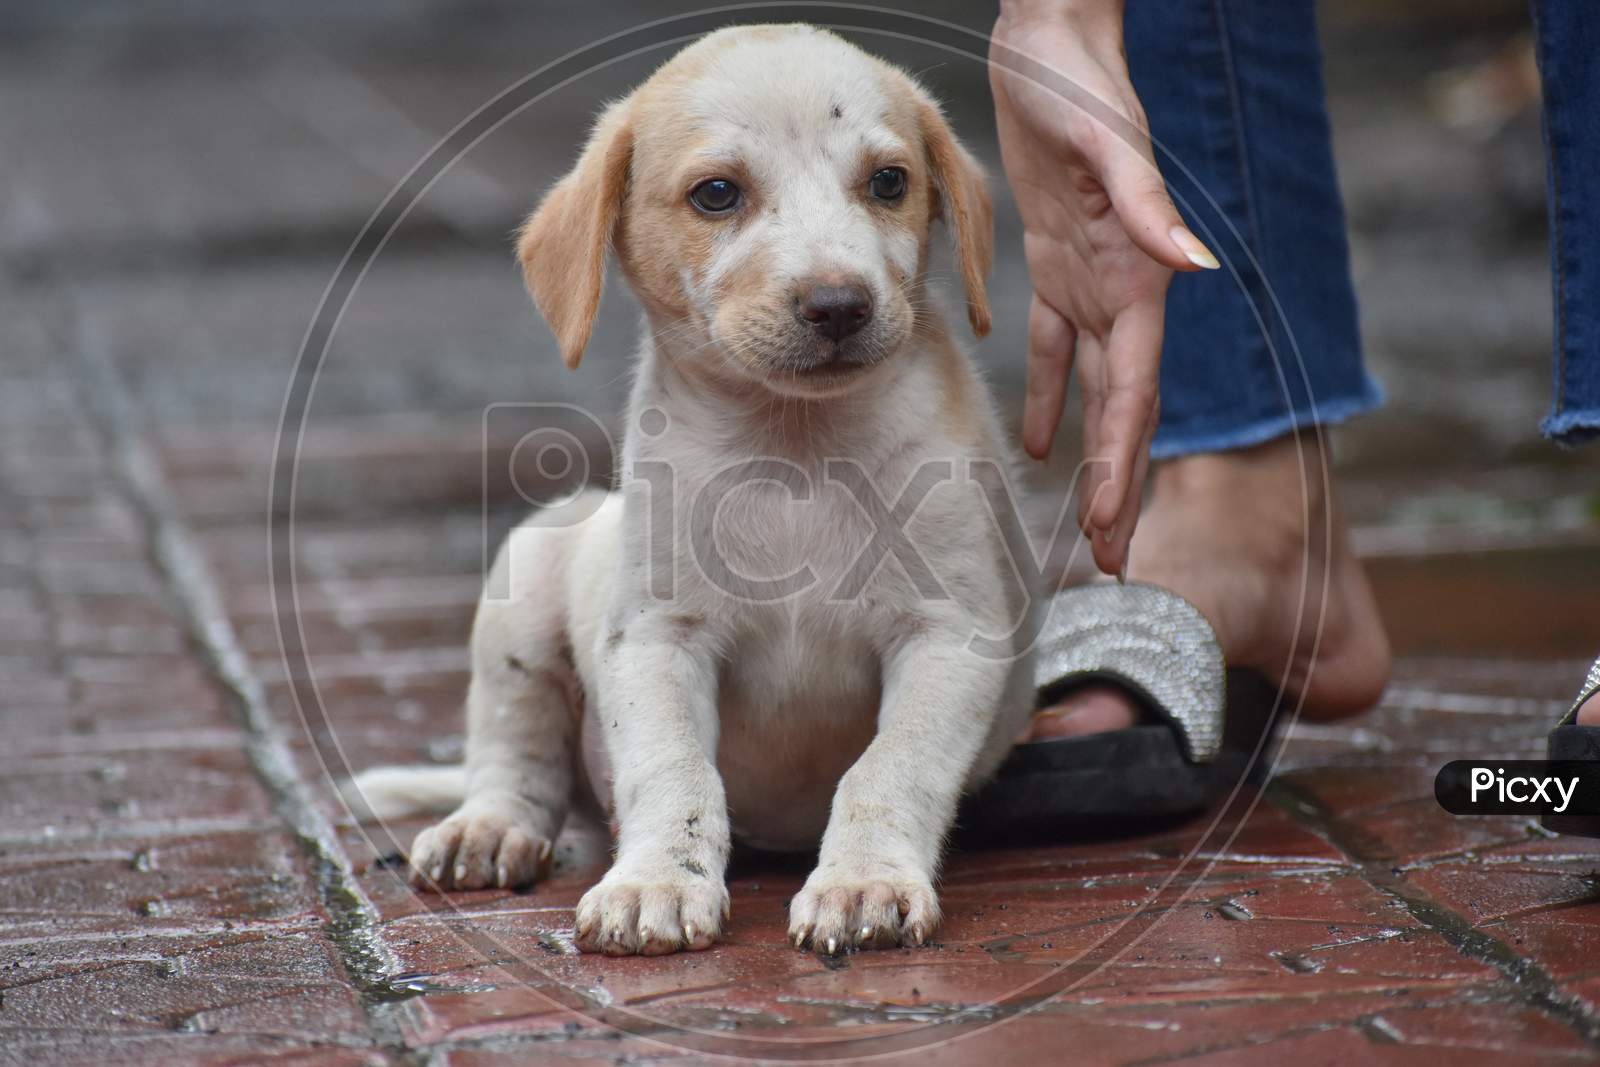 Indian Street Puppy Sitting And Waiting For His Owner